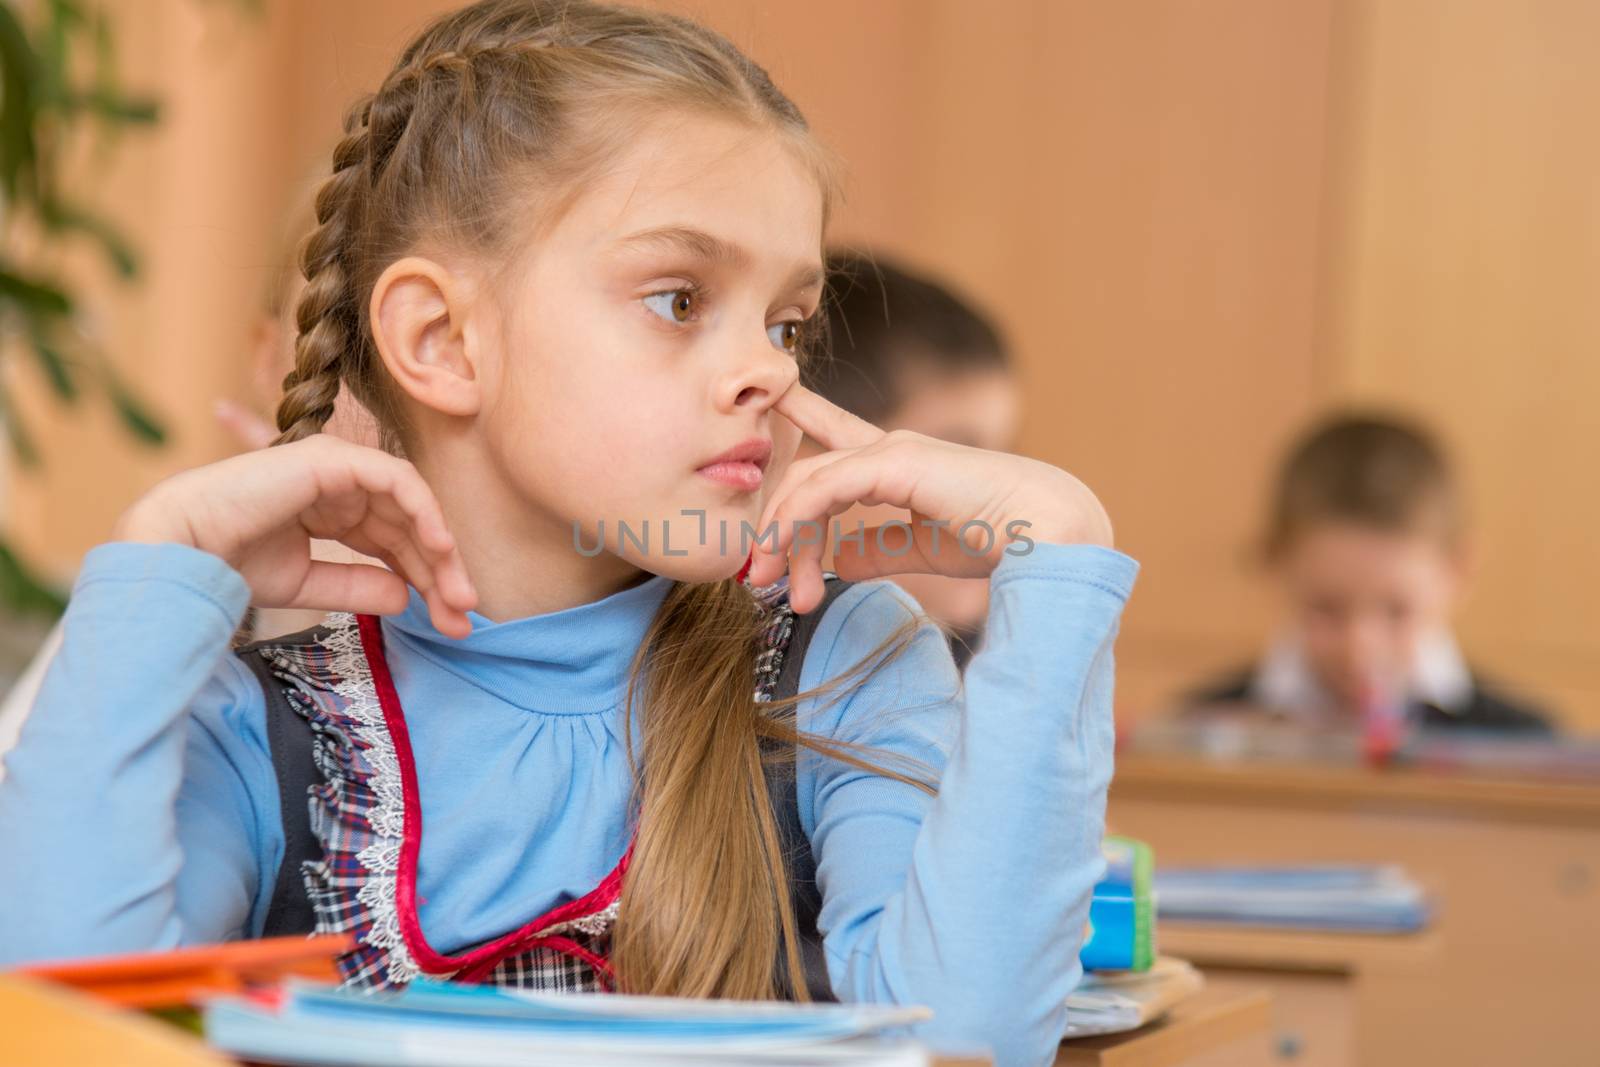 The girl at a lesson at school picking his nose